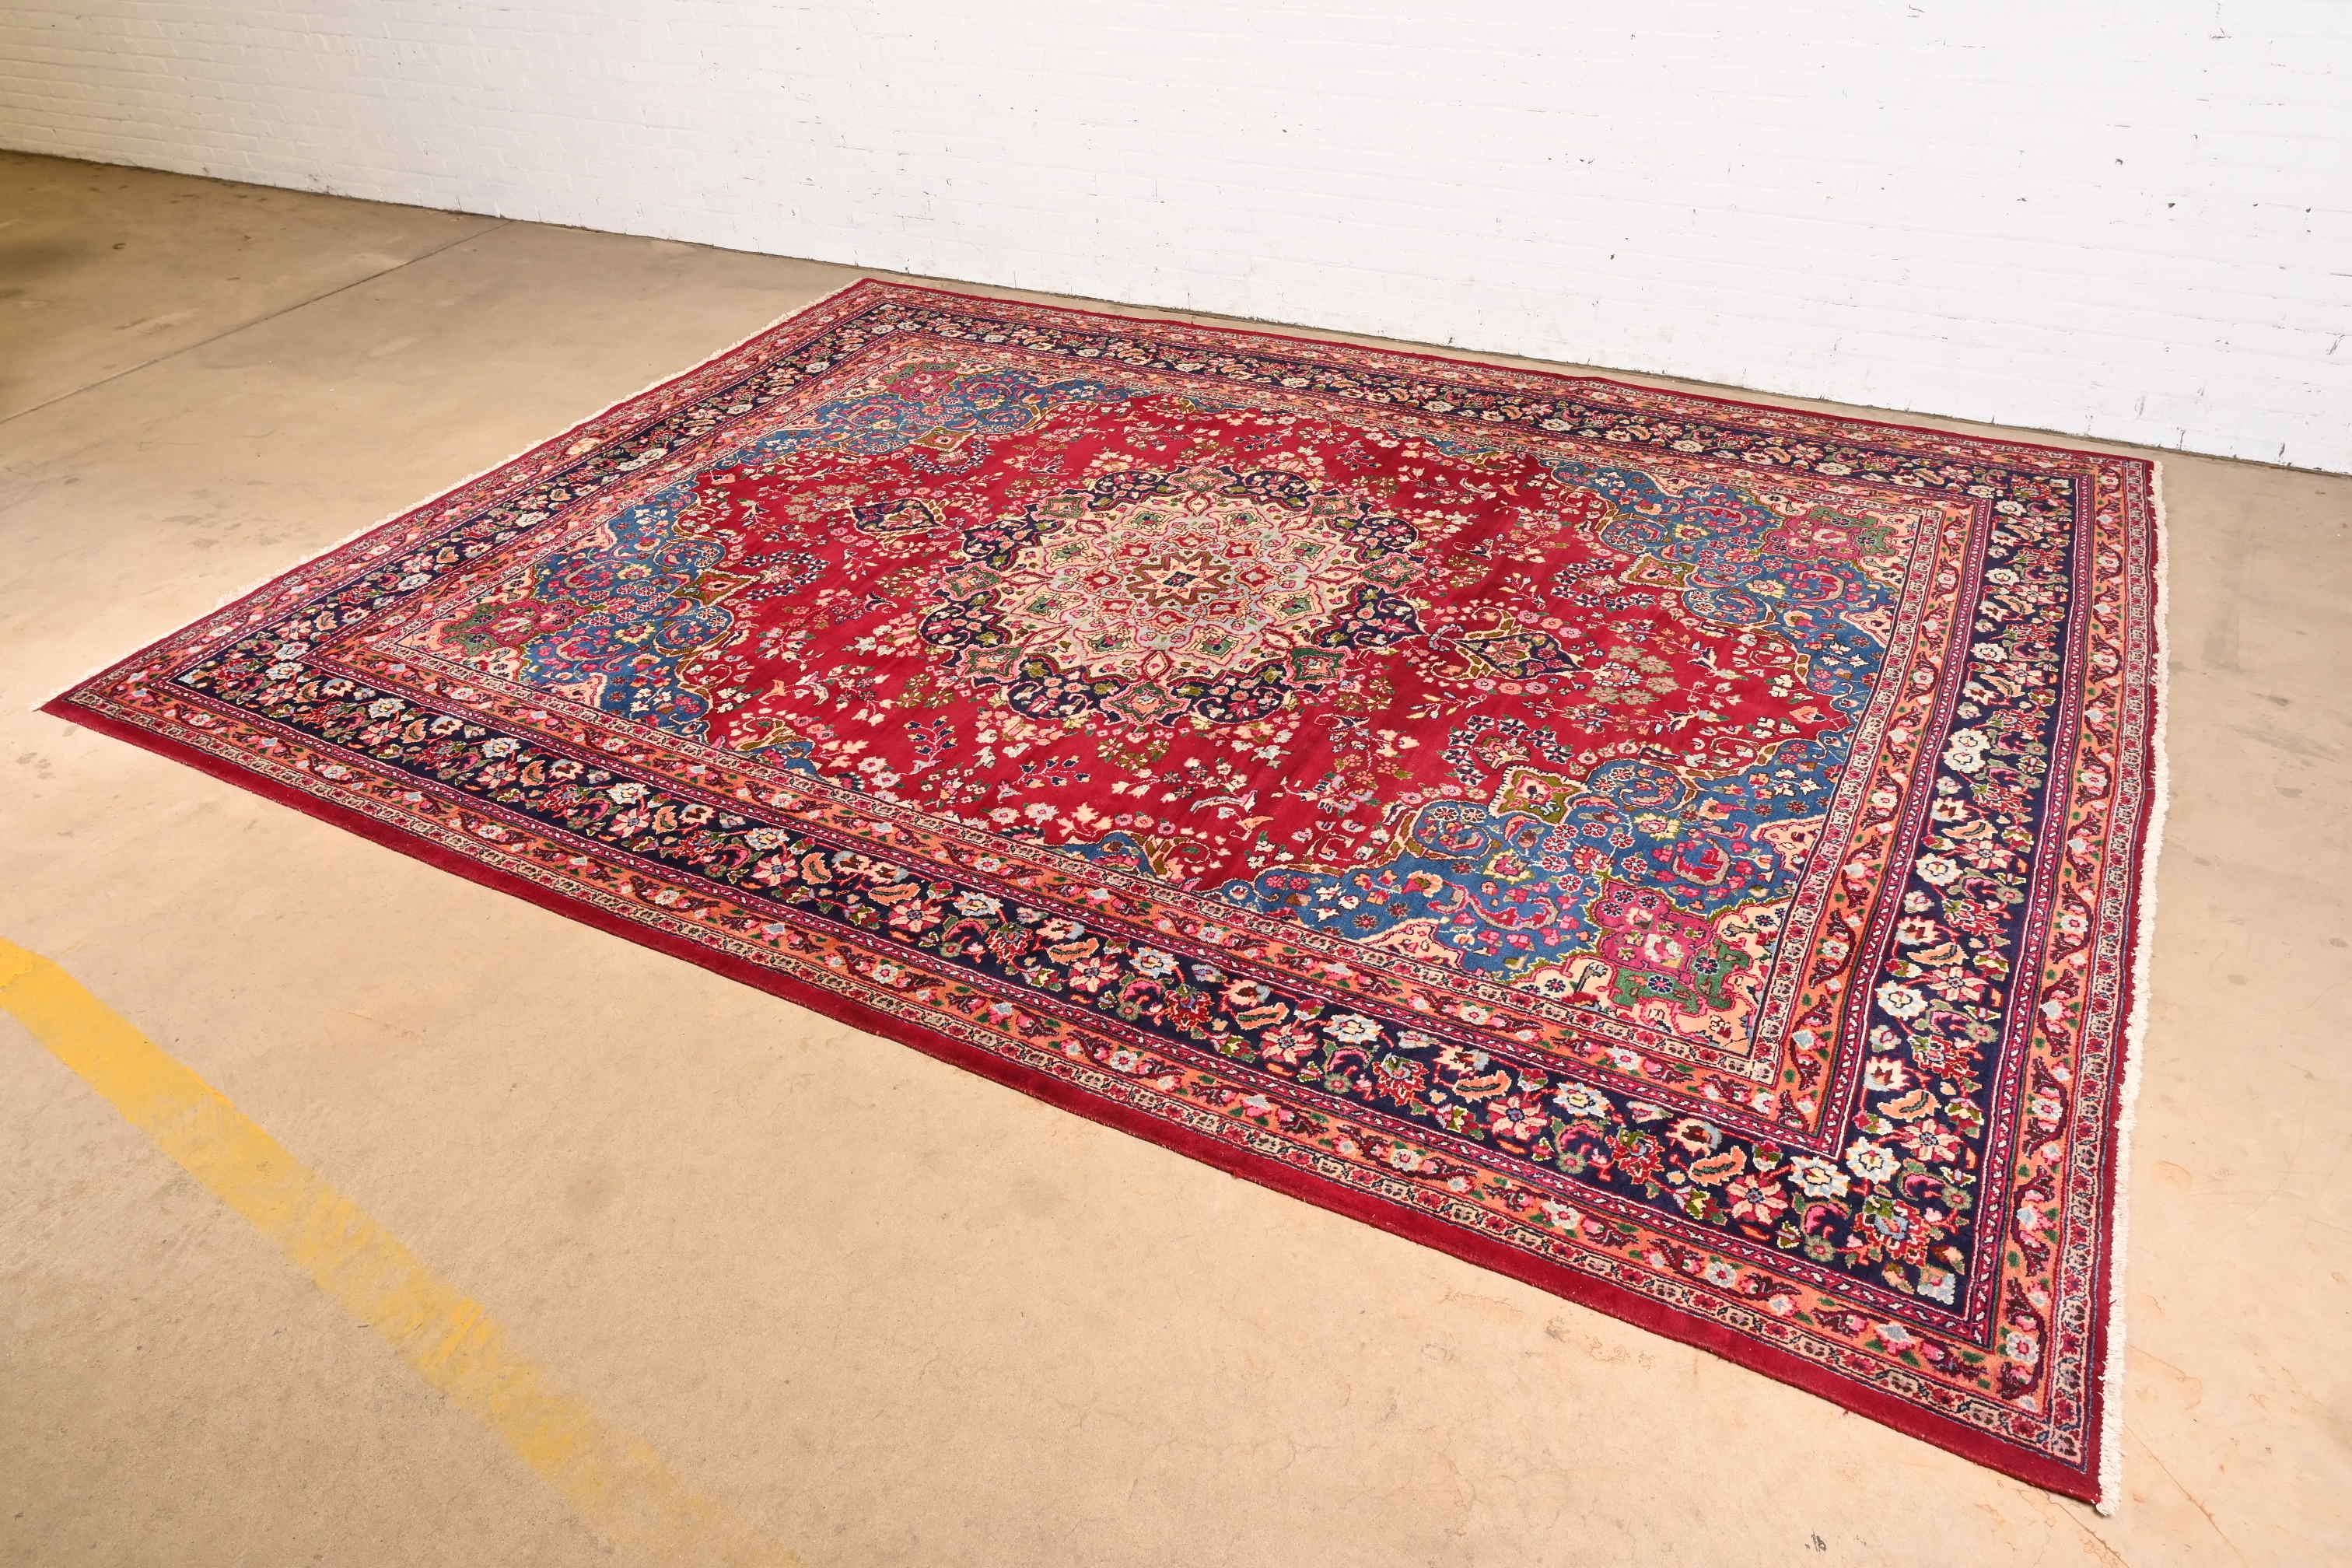 A gorgeous vintage hand-knotted Persian Kashan large room size wool rug

Circa Mid-20th Century

Beautiful floral design, with predominant colors in red, pink, blue, green, and ivory.

Measures: 9'11